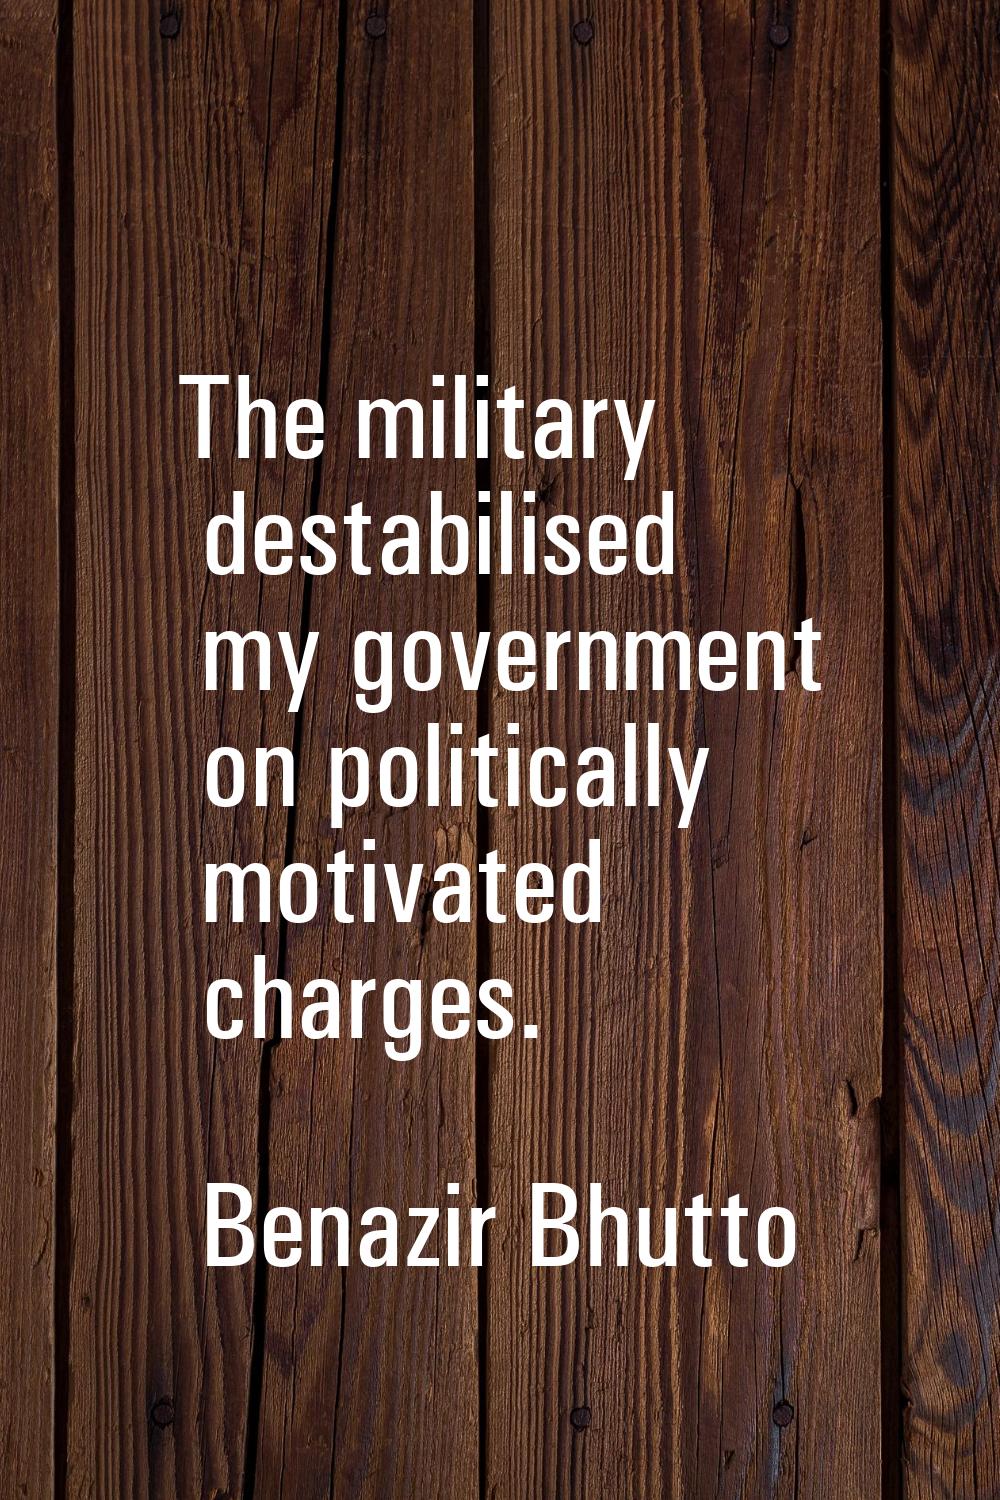 The military destabilised my government on politically motivated charges.